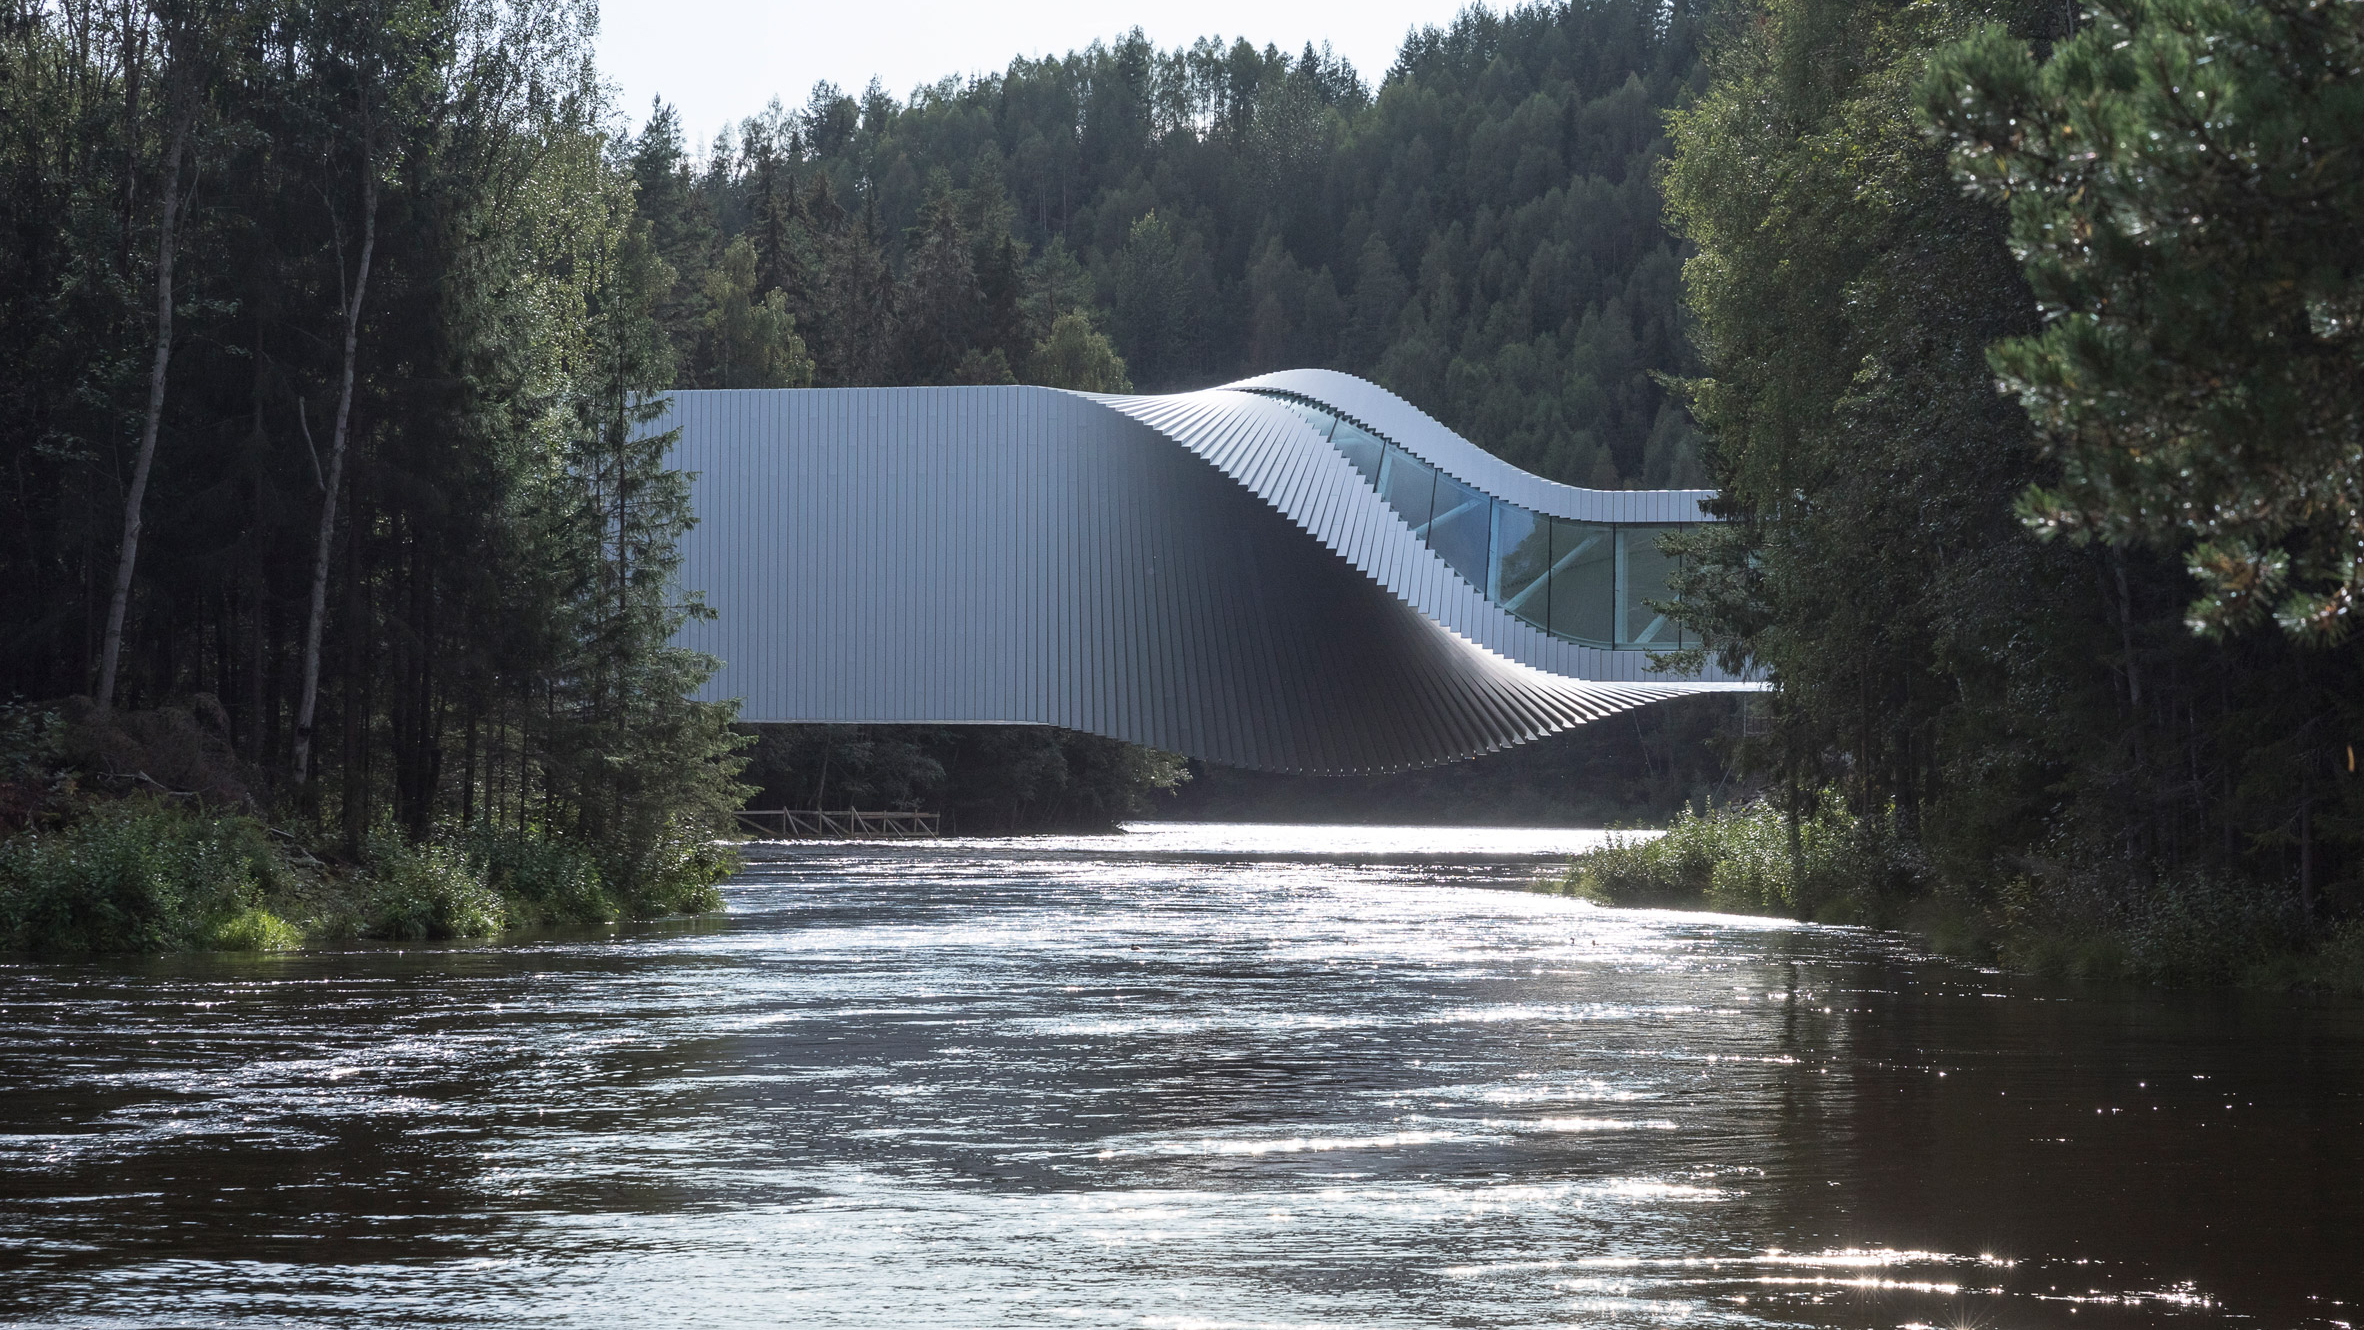 The Twist art gallery at Kistefos sculpture park in Norway, by BIG